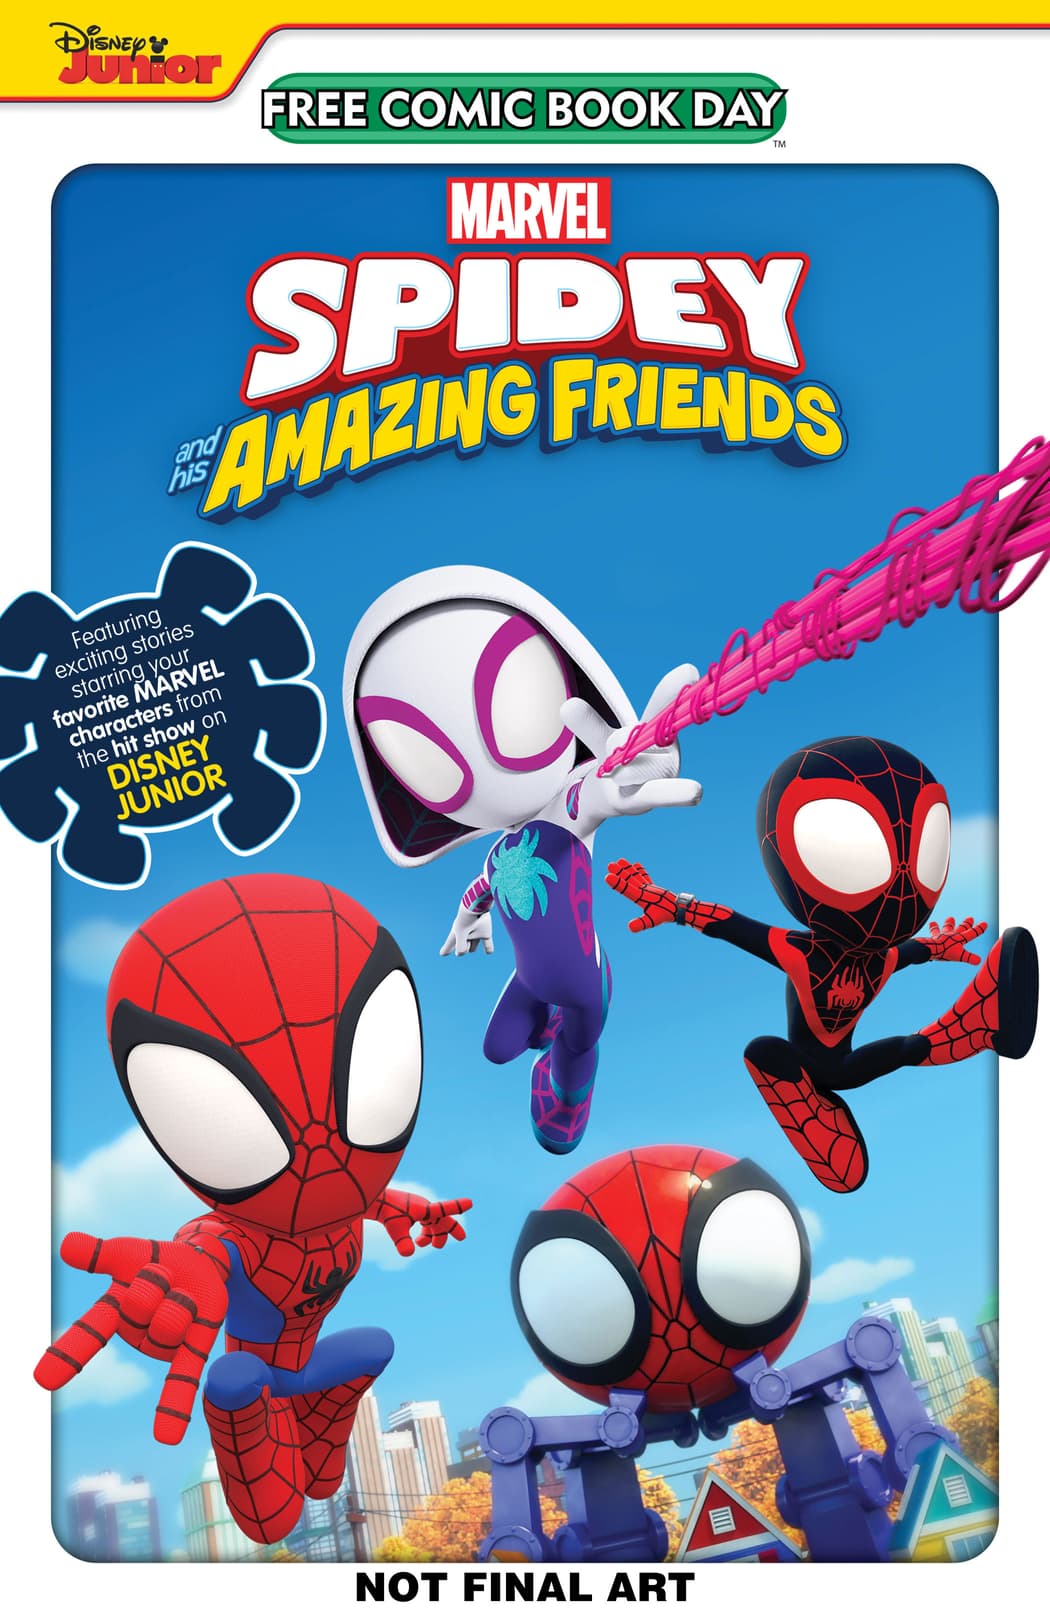 FREE COMIC BOOK DAY 2023: SPIDEY & HIS AMAZING FRIENDS #1 cover